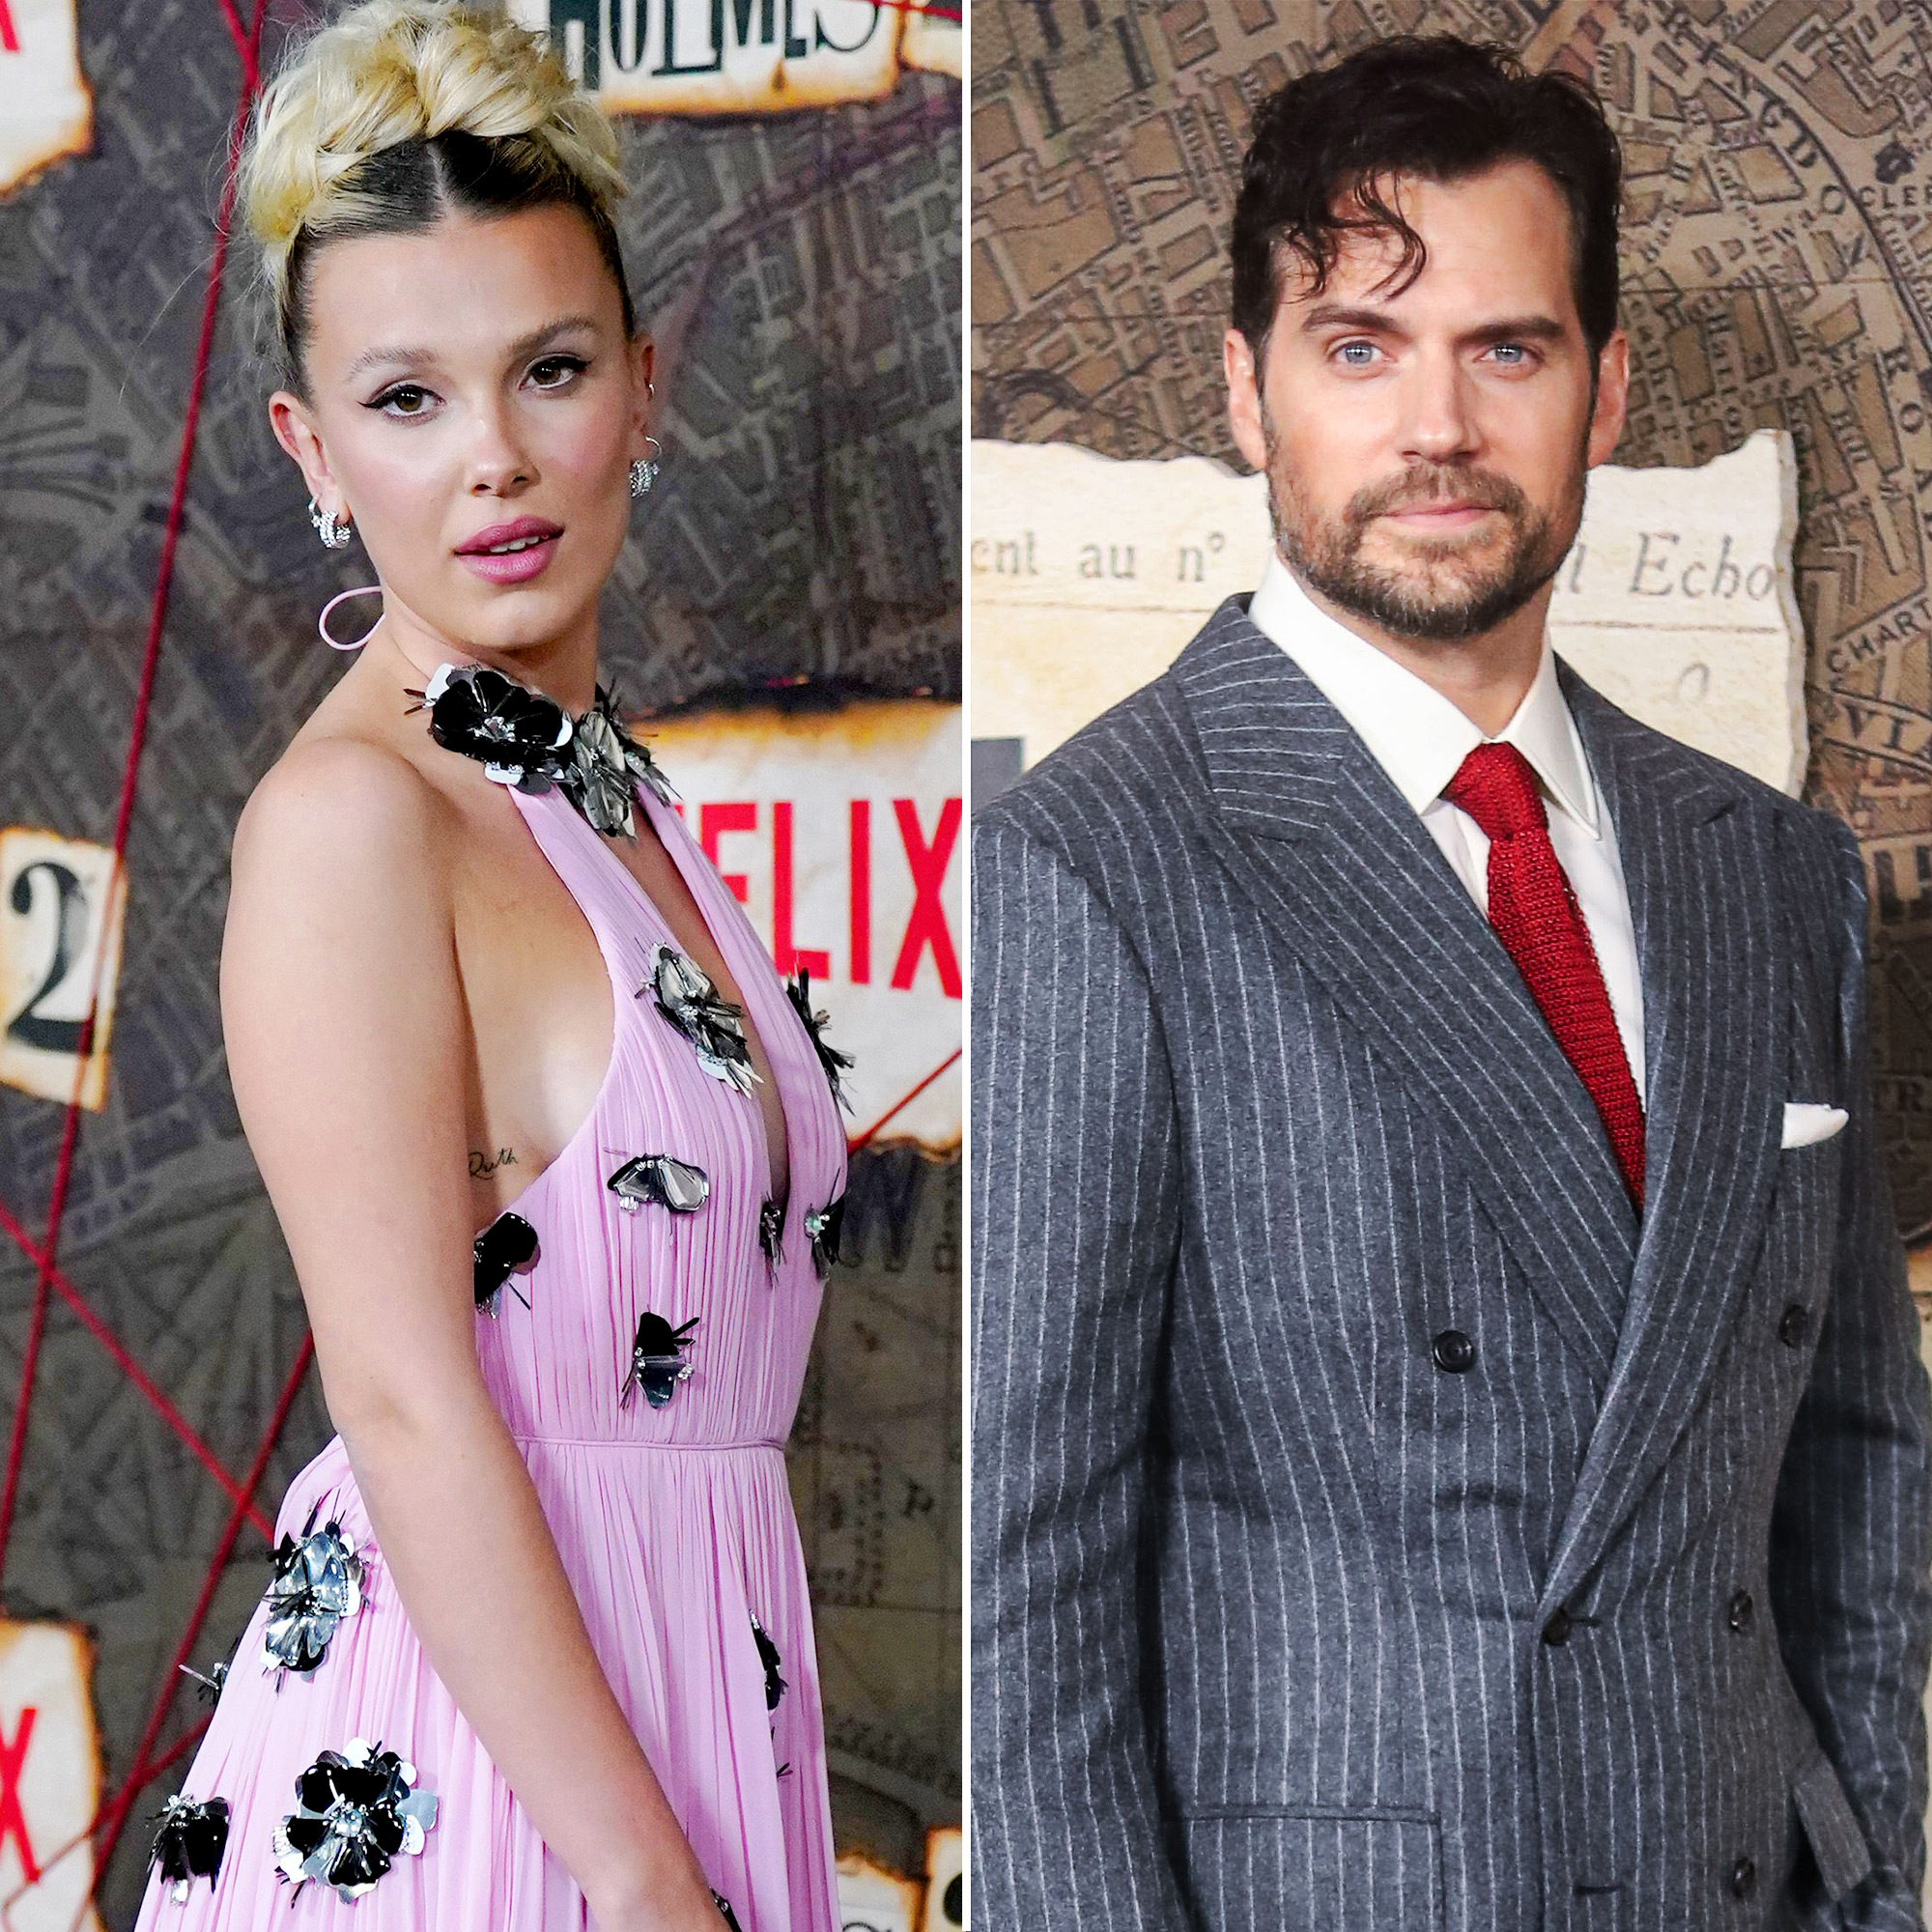 Millie Bobby Brown has an 'adult relationship' with Henry Cavill